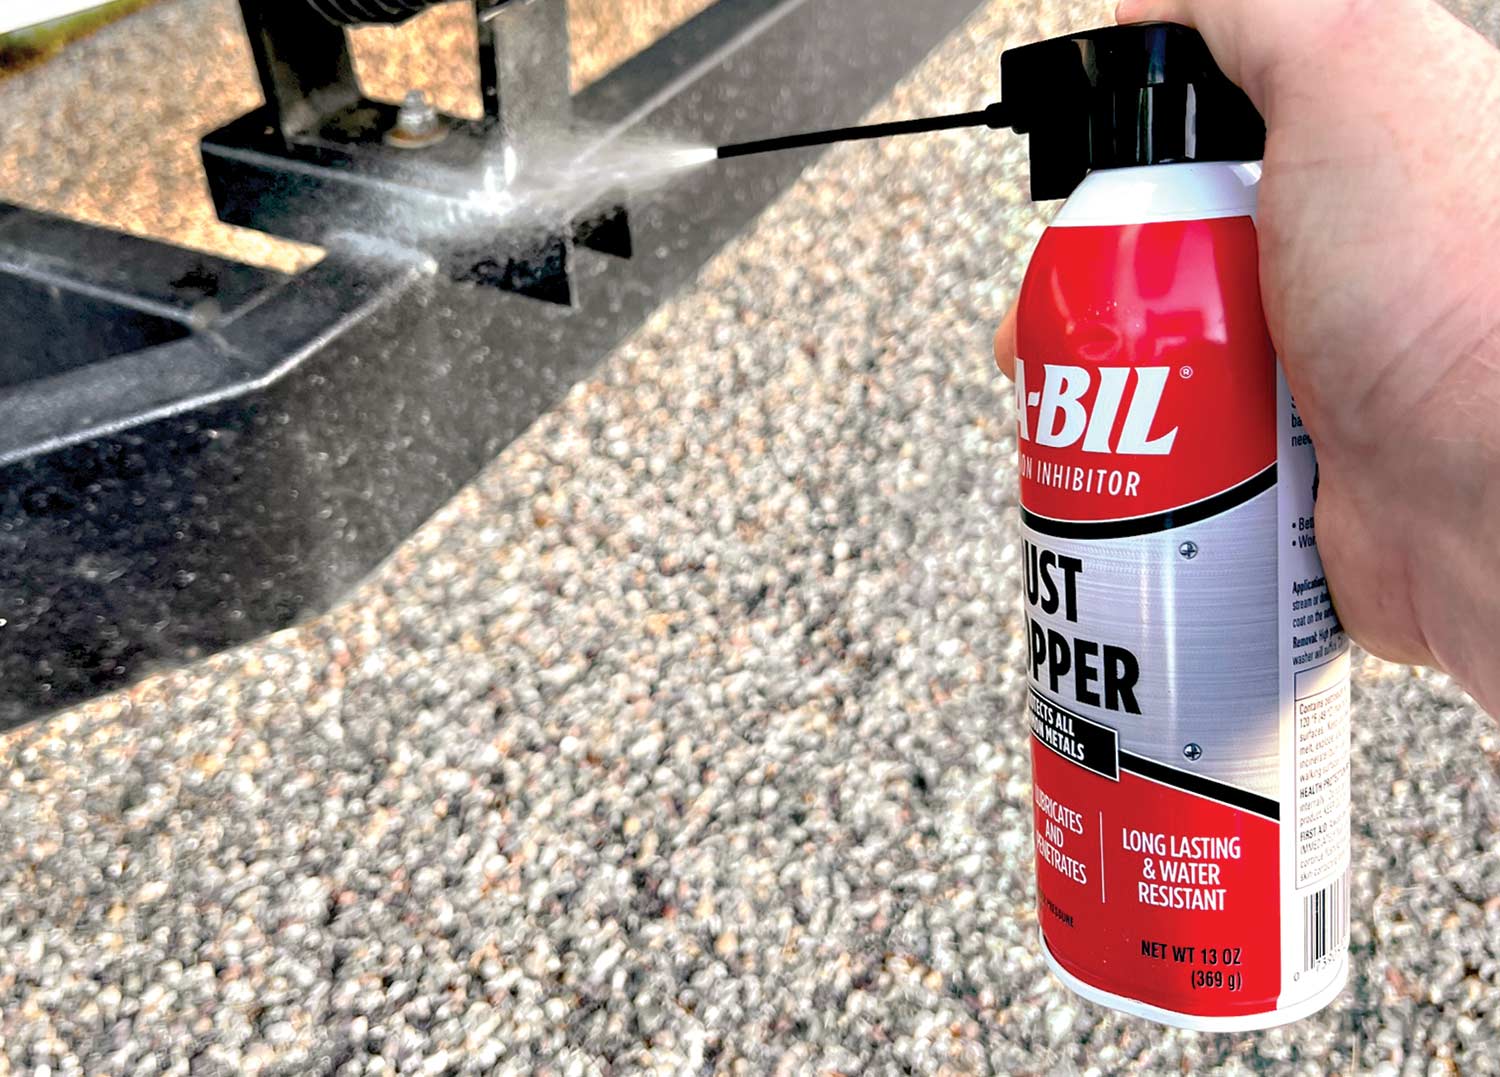 Close-up photograph perspective of person's hand gripping/spraying STA-BIL's Rust Stopper aerosol protectant onto a metal area of a boat trailer that contains some rust damage